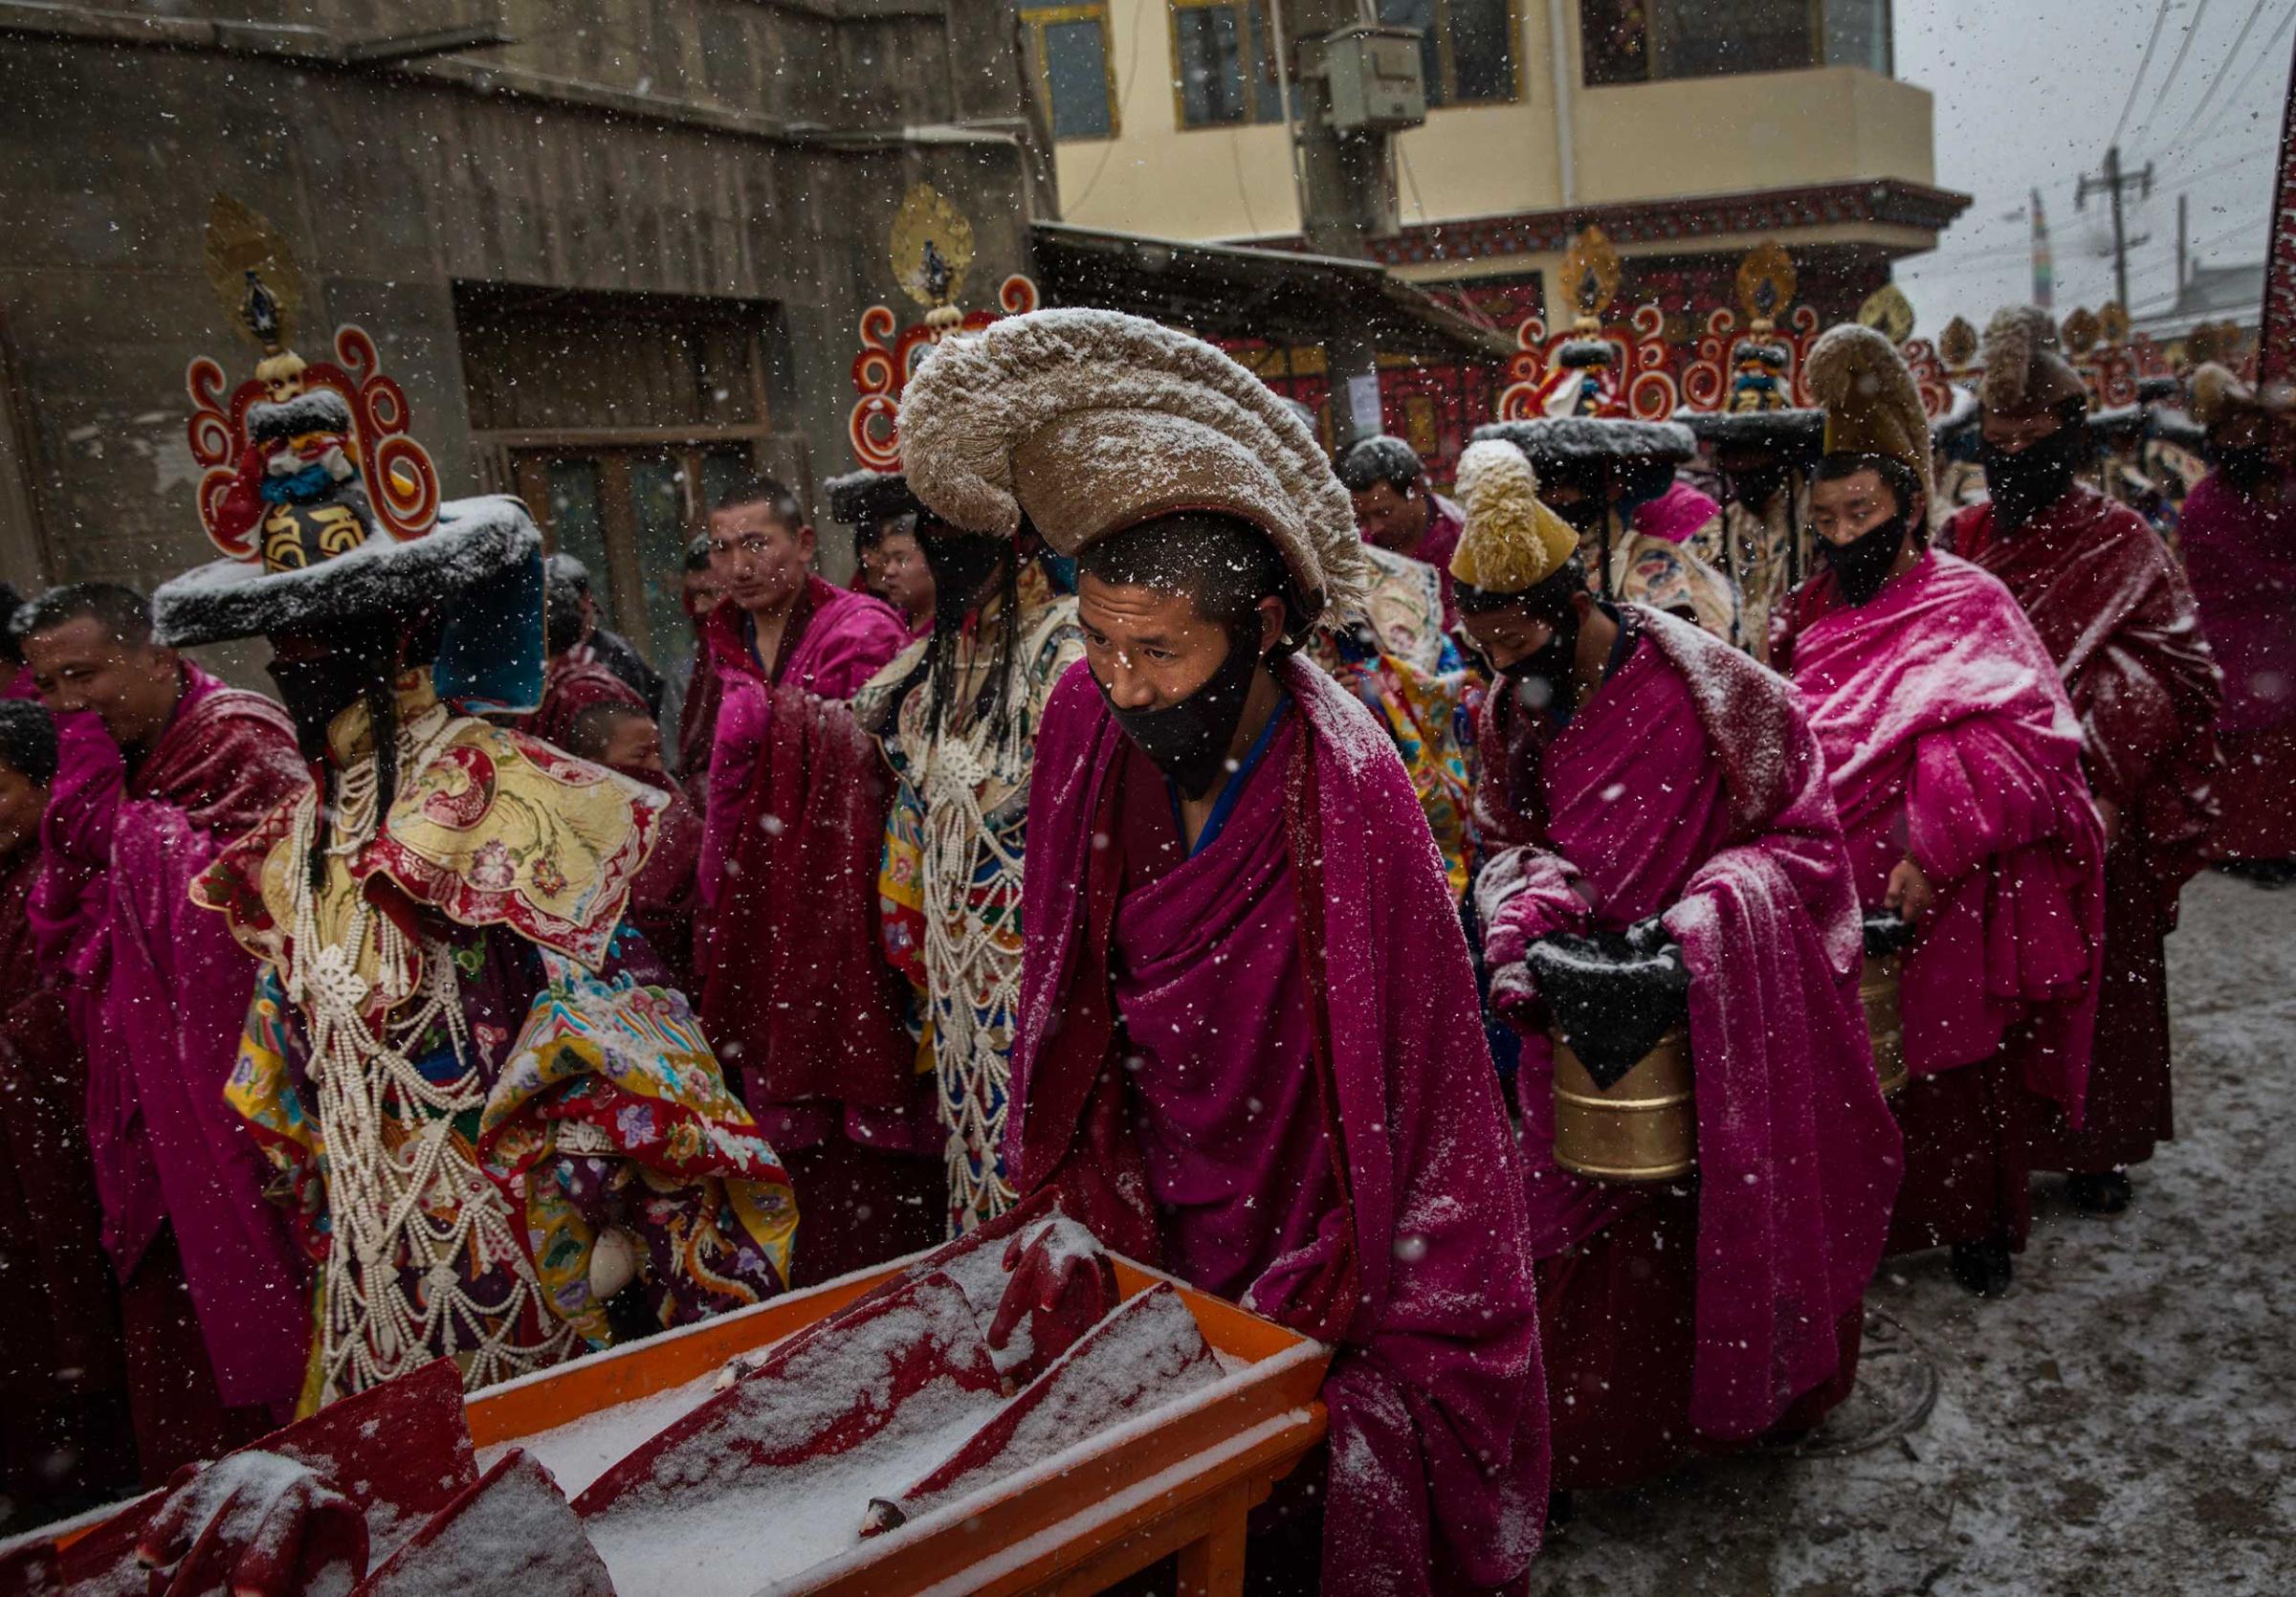 Tibetan Buddhist monks walk in a procession in the snow during Monlam or the Great Prayer rituals at the Labrang Monastery, Xiahe County, Amdo, Tibetan Autonomous Prefecture, Gansu Province, China, March 4, 2015.